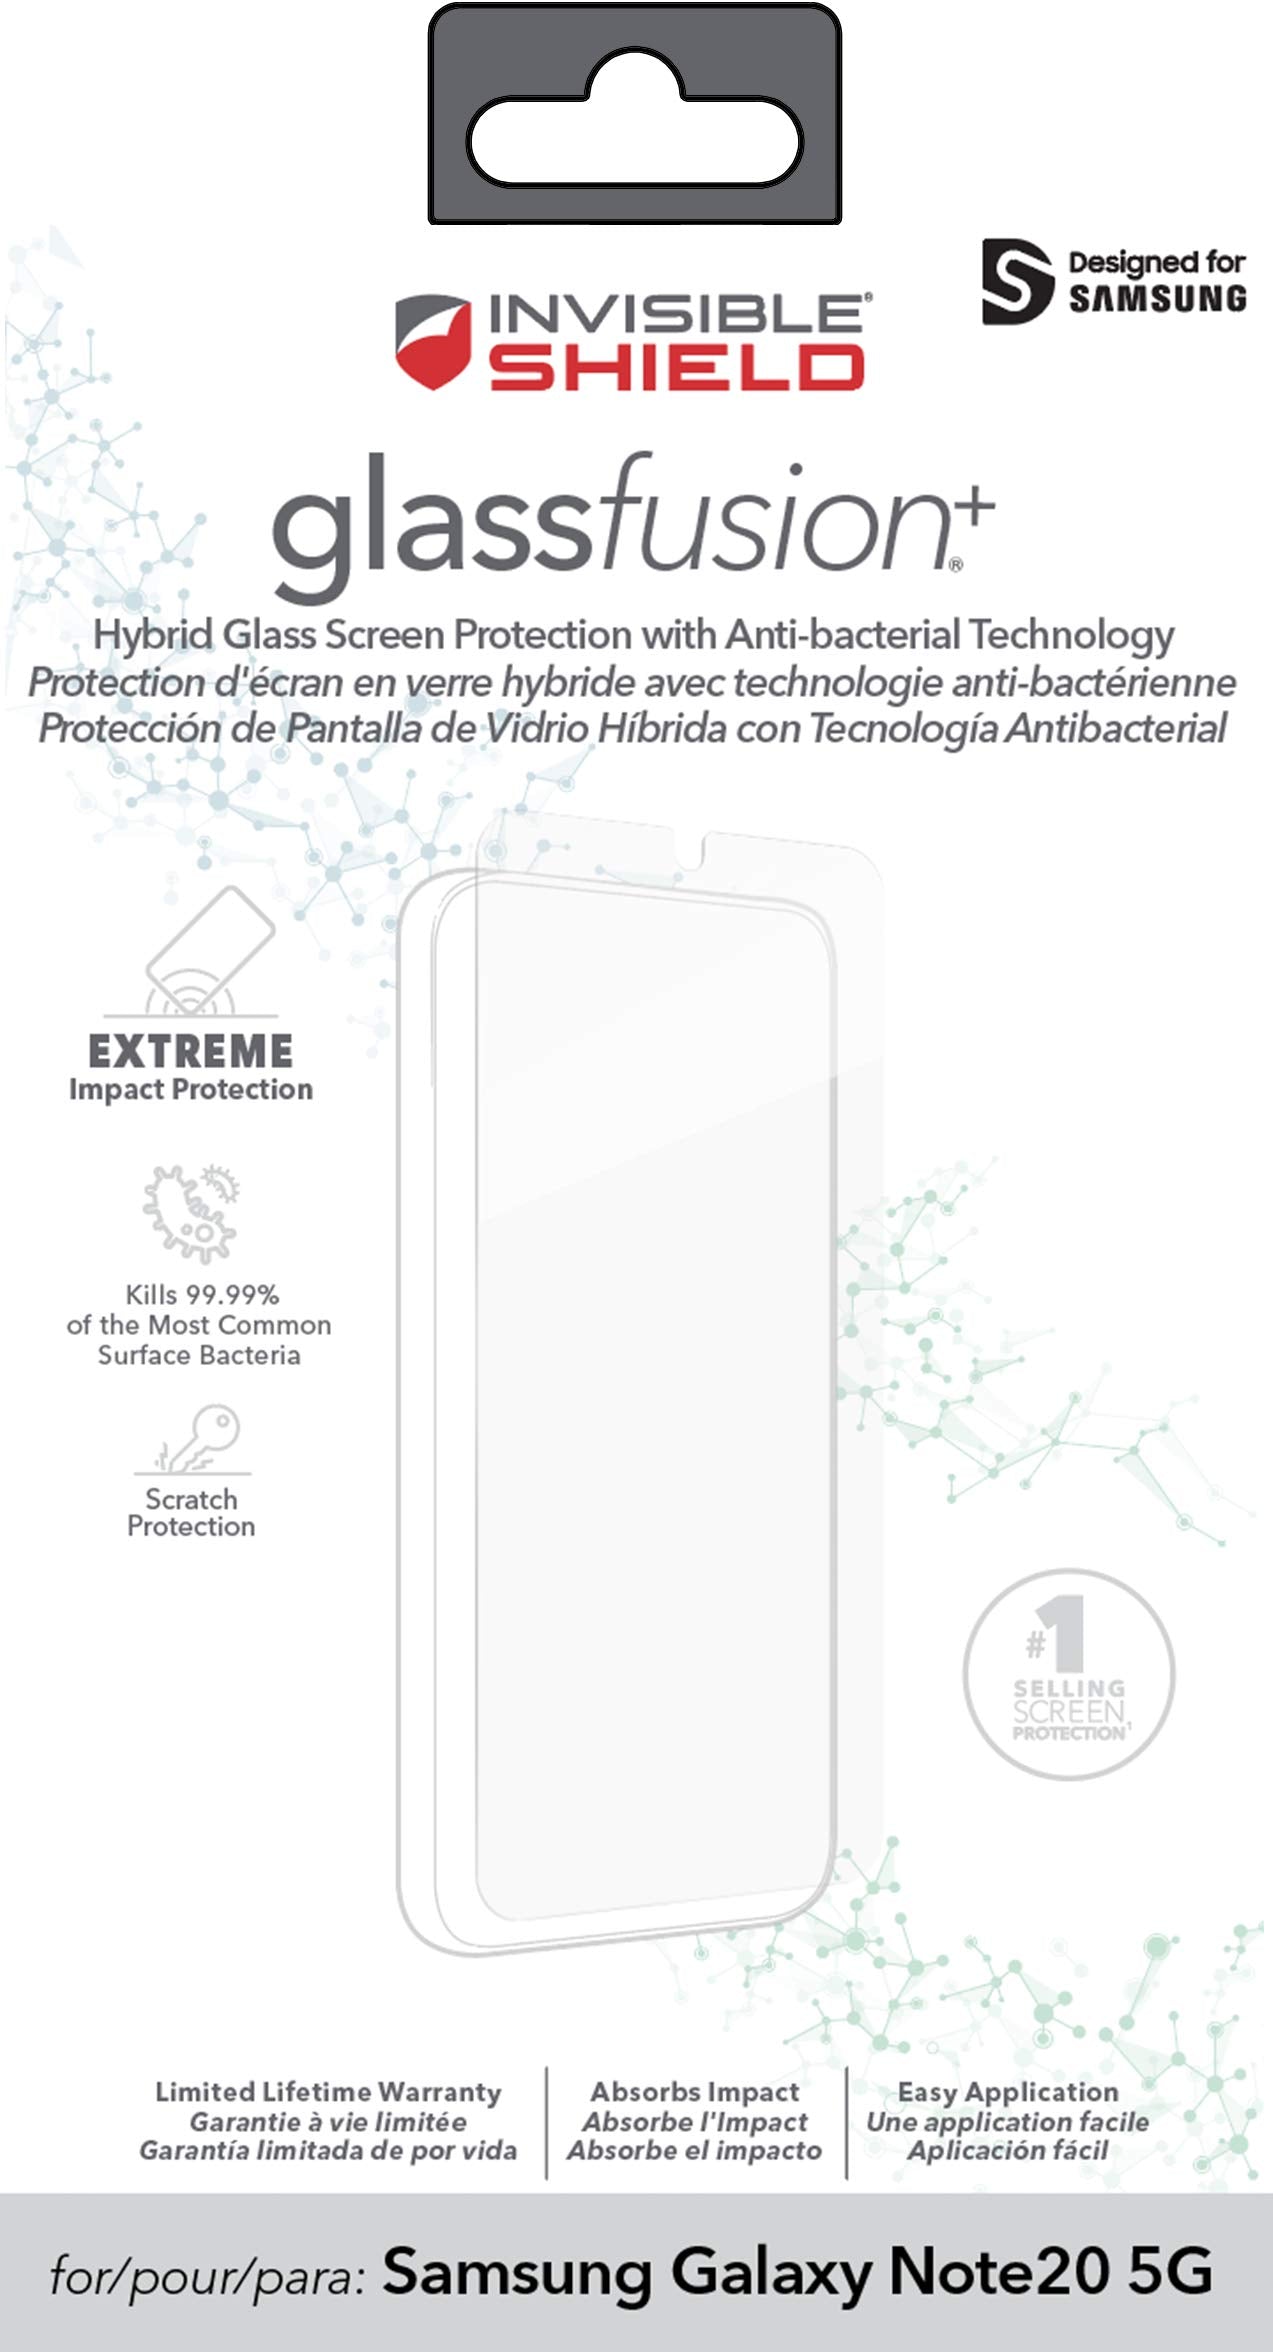 ZAGG Invisbleshield Glass Fusion Plus - Engineered Hybrid Glass - Screen Protector - Made for Samsung Note 20 - Clear (200106616)